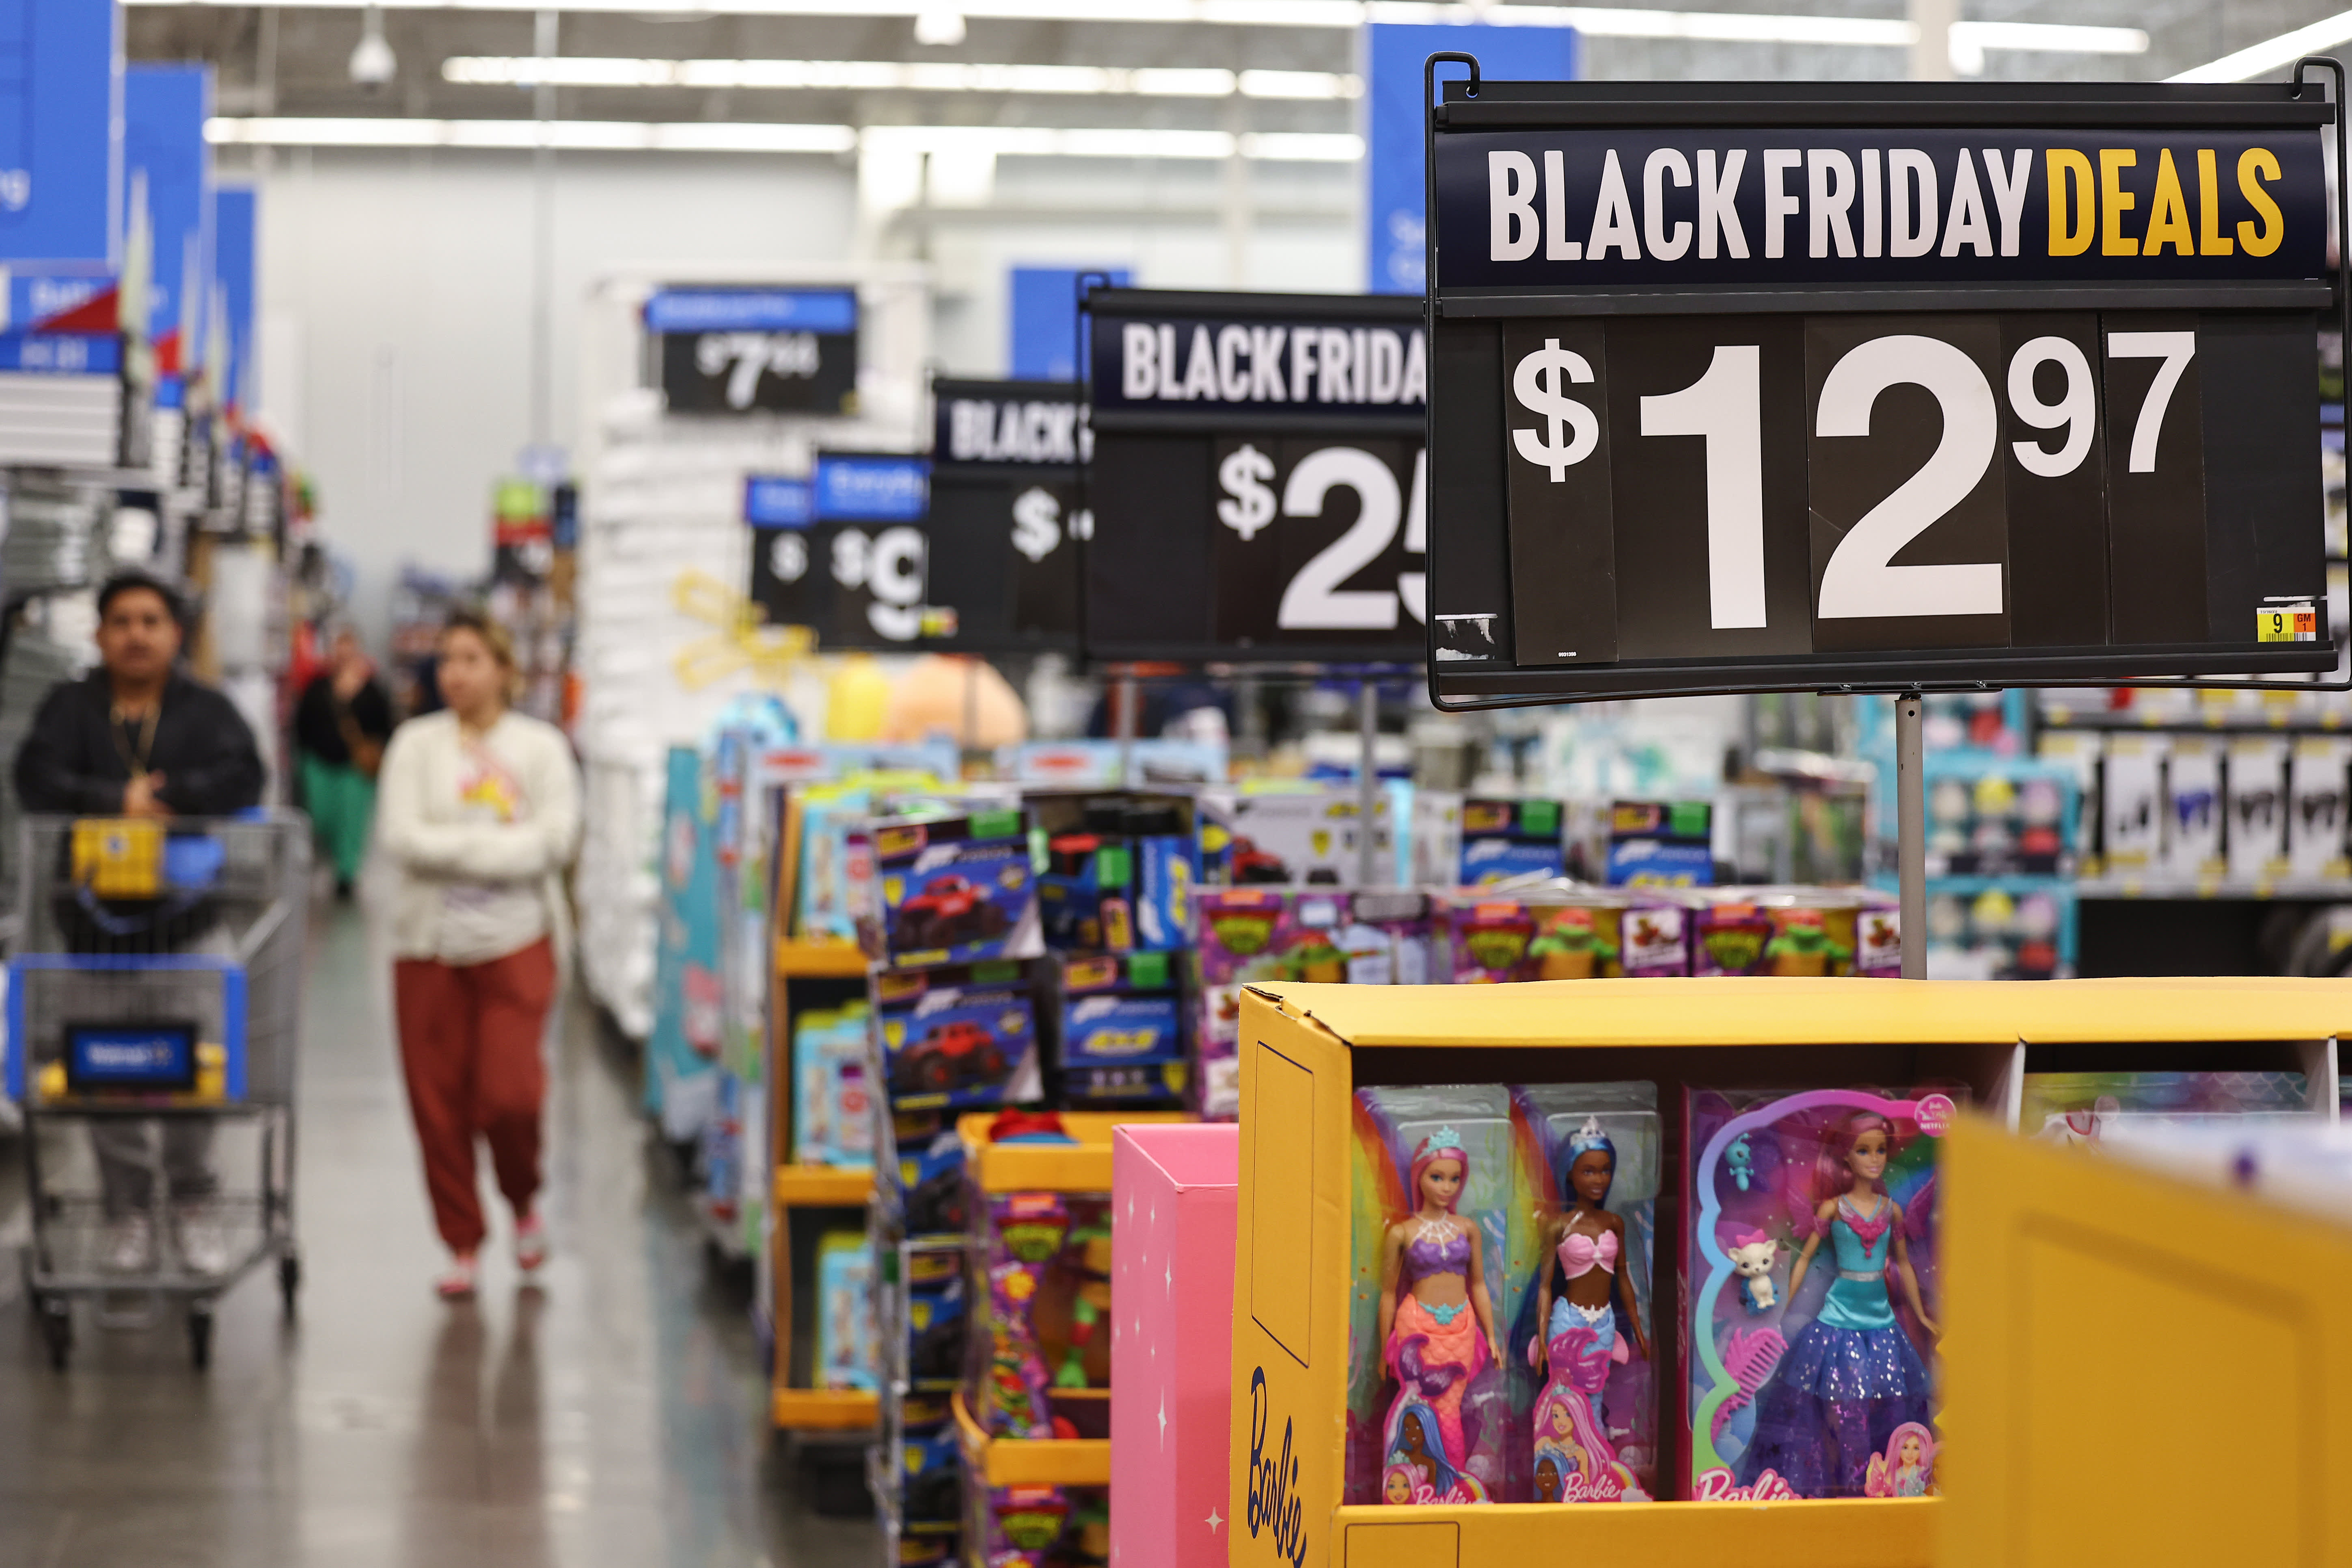 Early Black Friday discounts higher than prior years